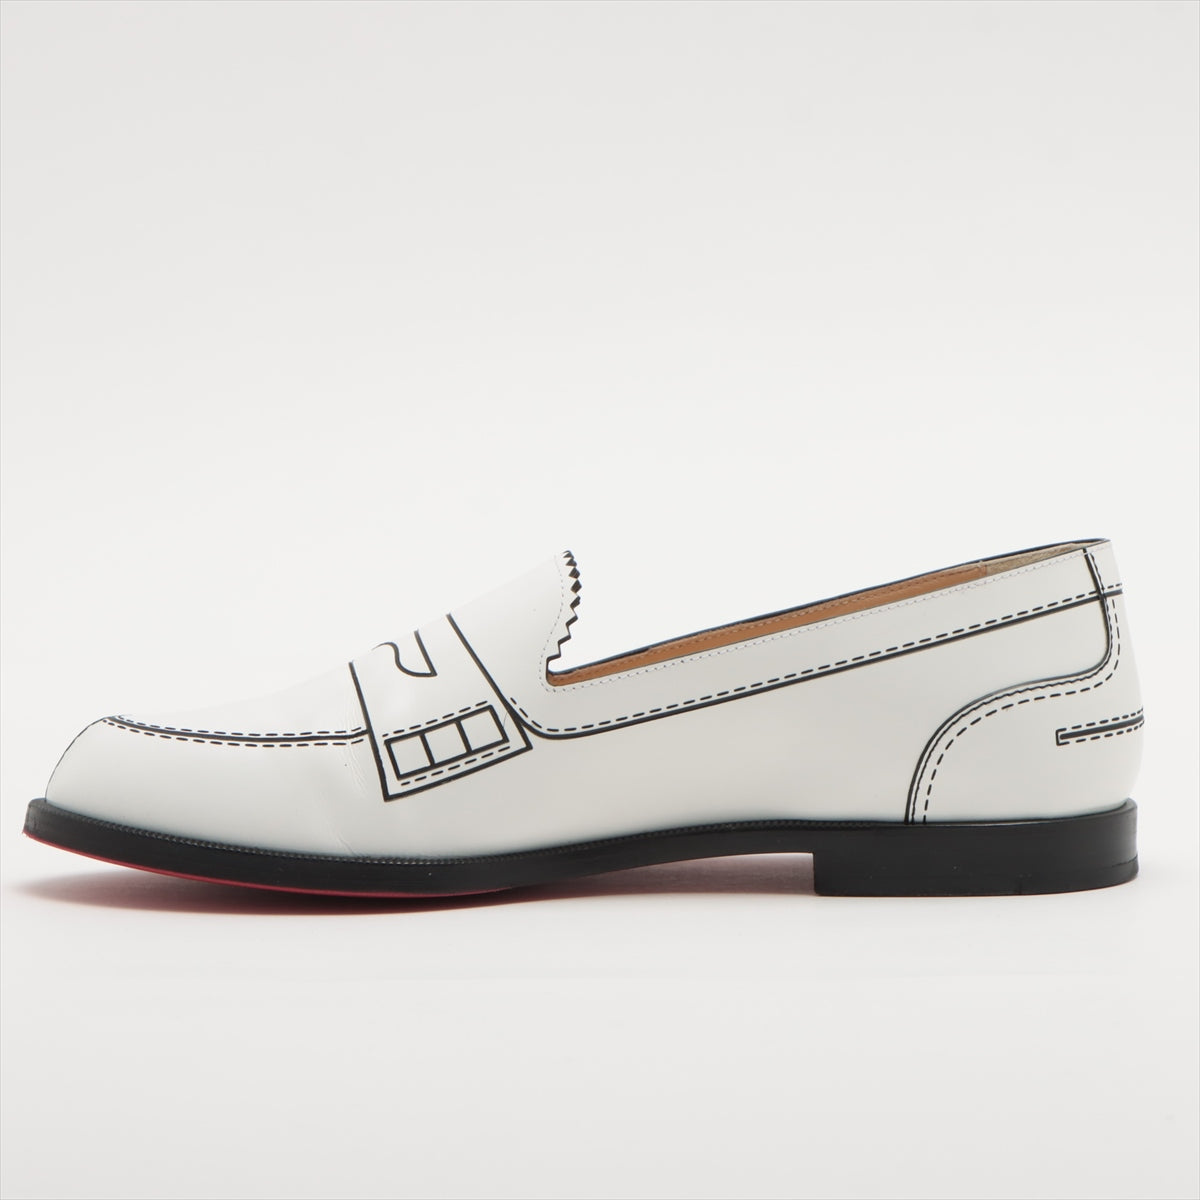 Christian Louboutin Leather Loafer 36 Ladies' Black × White MOCALAUREAT There is a box